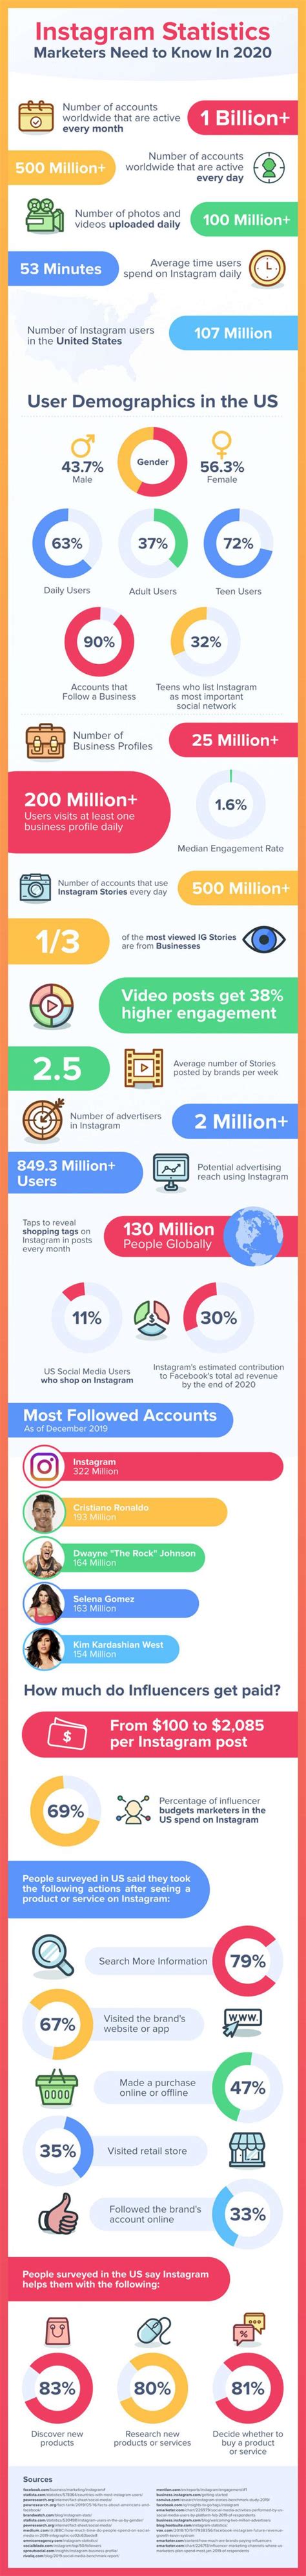 Instagram Statistics Marketers Need To Know In 2020 With